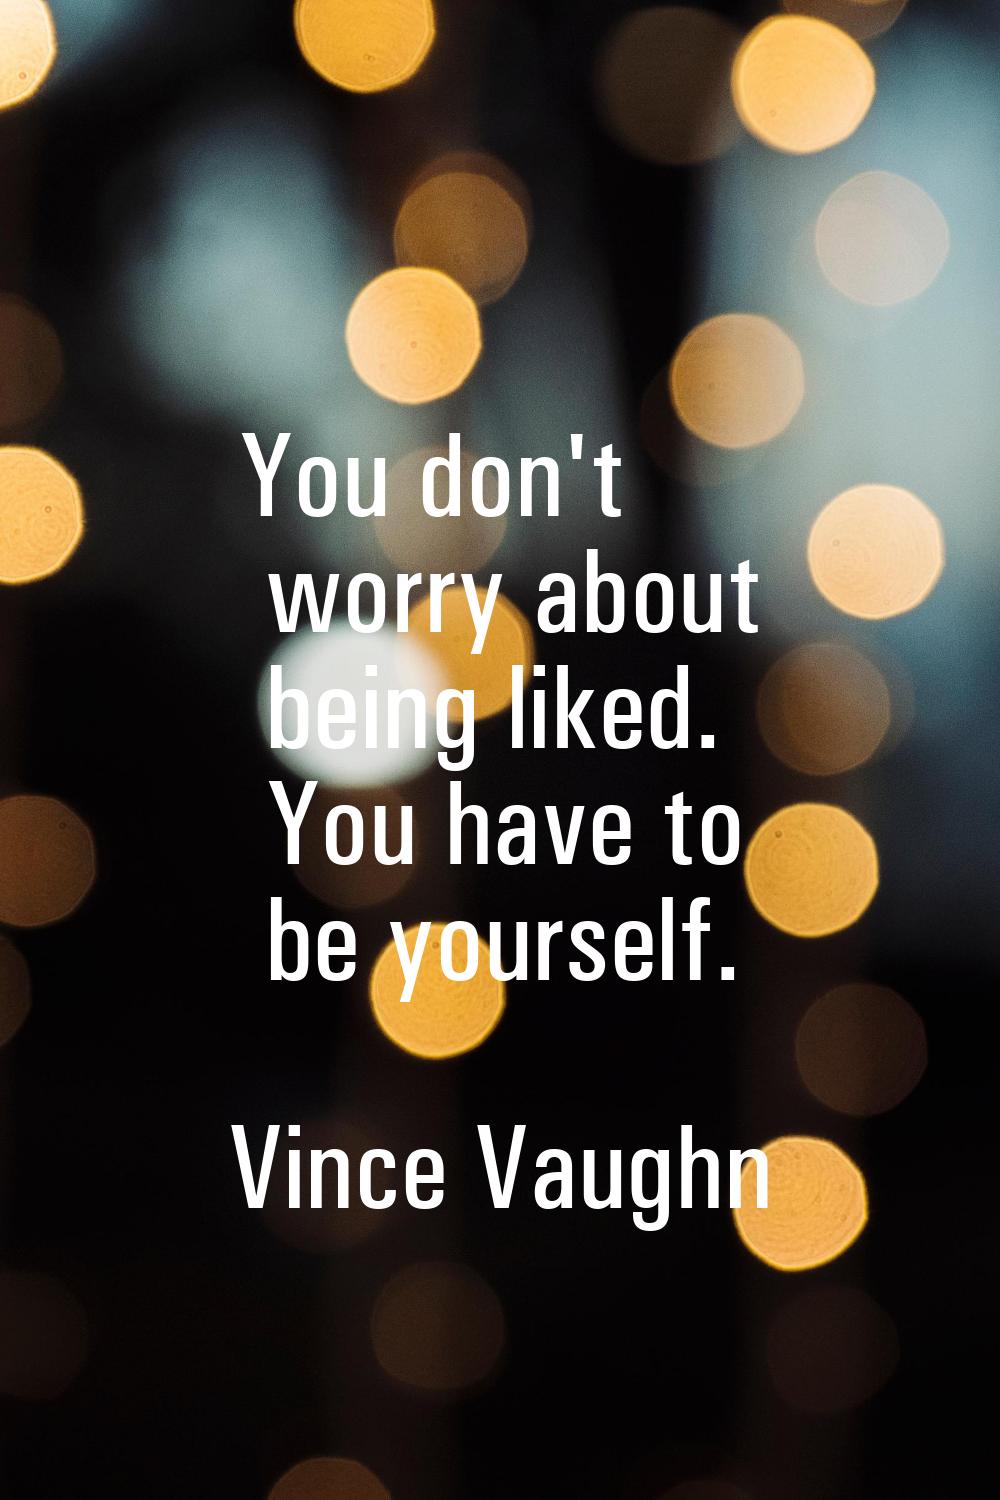 You don't worry about being liked. You have to be yourself.